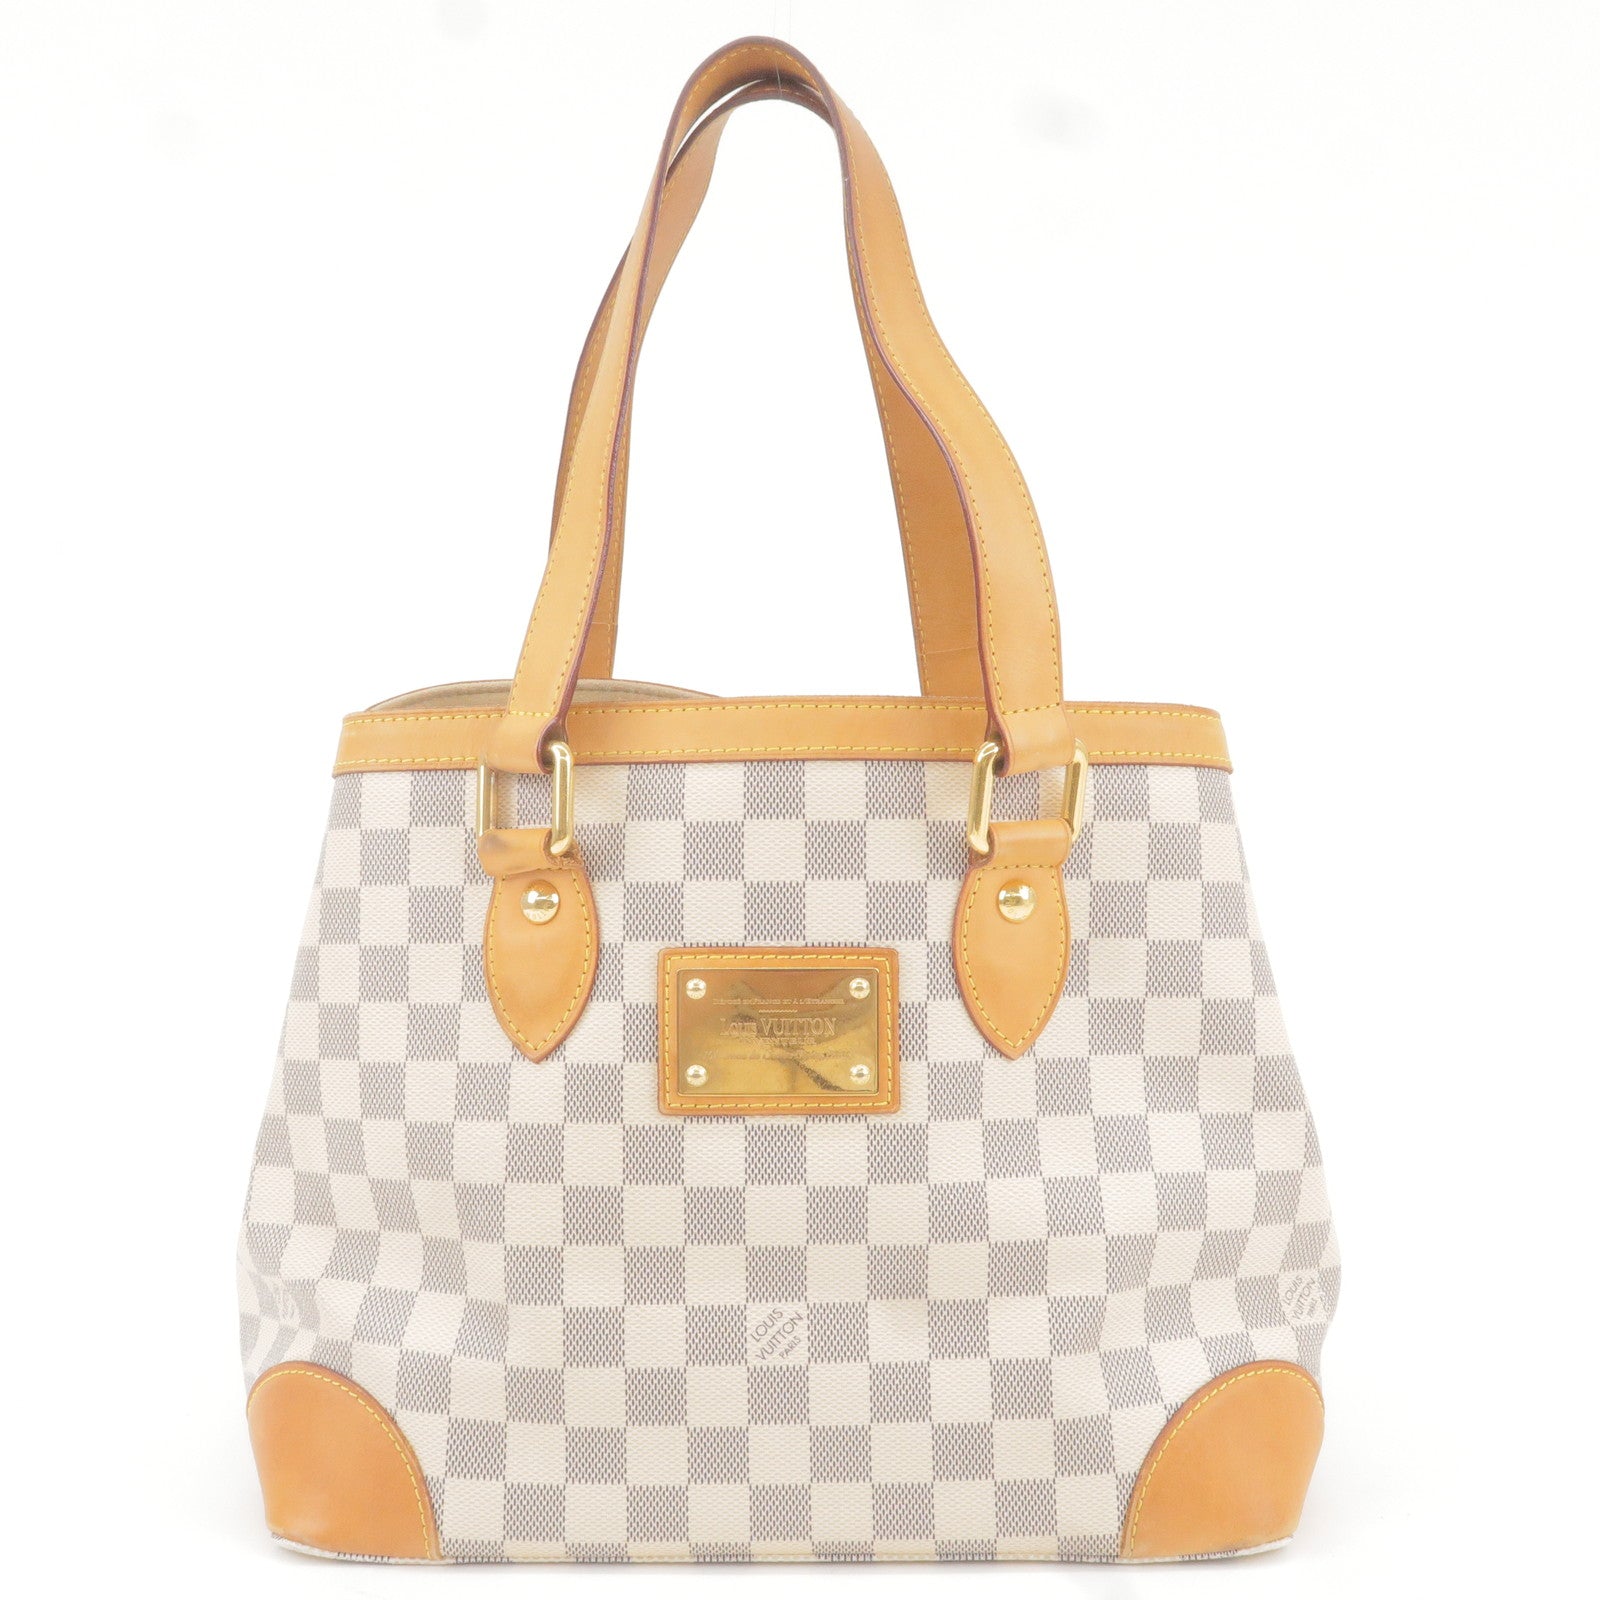 Louis Vuitton 2008 pre-owned Hampstead MM tote bag - Brown